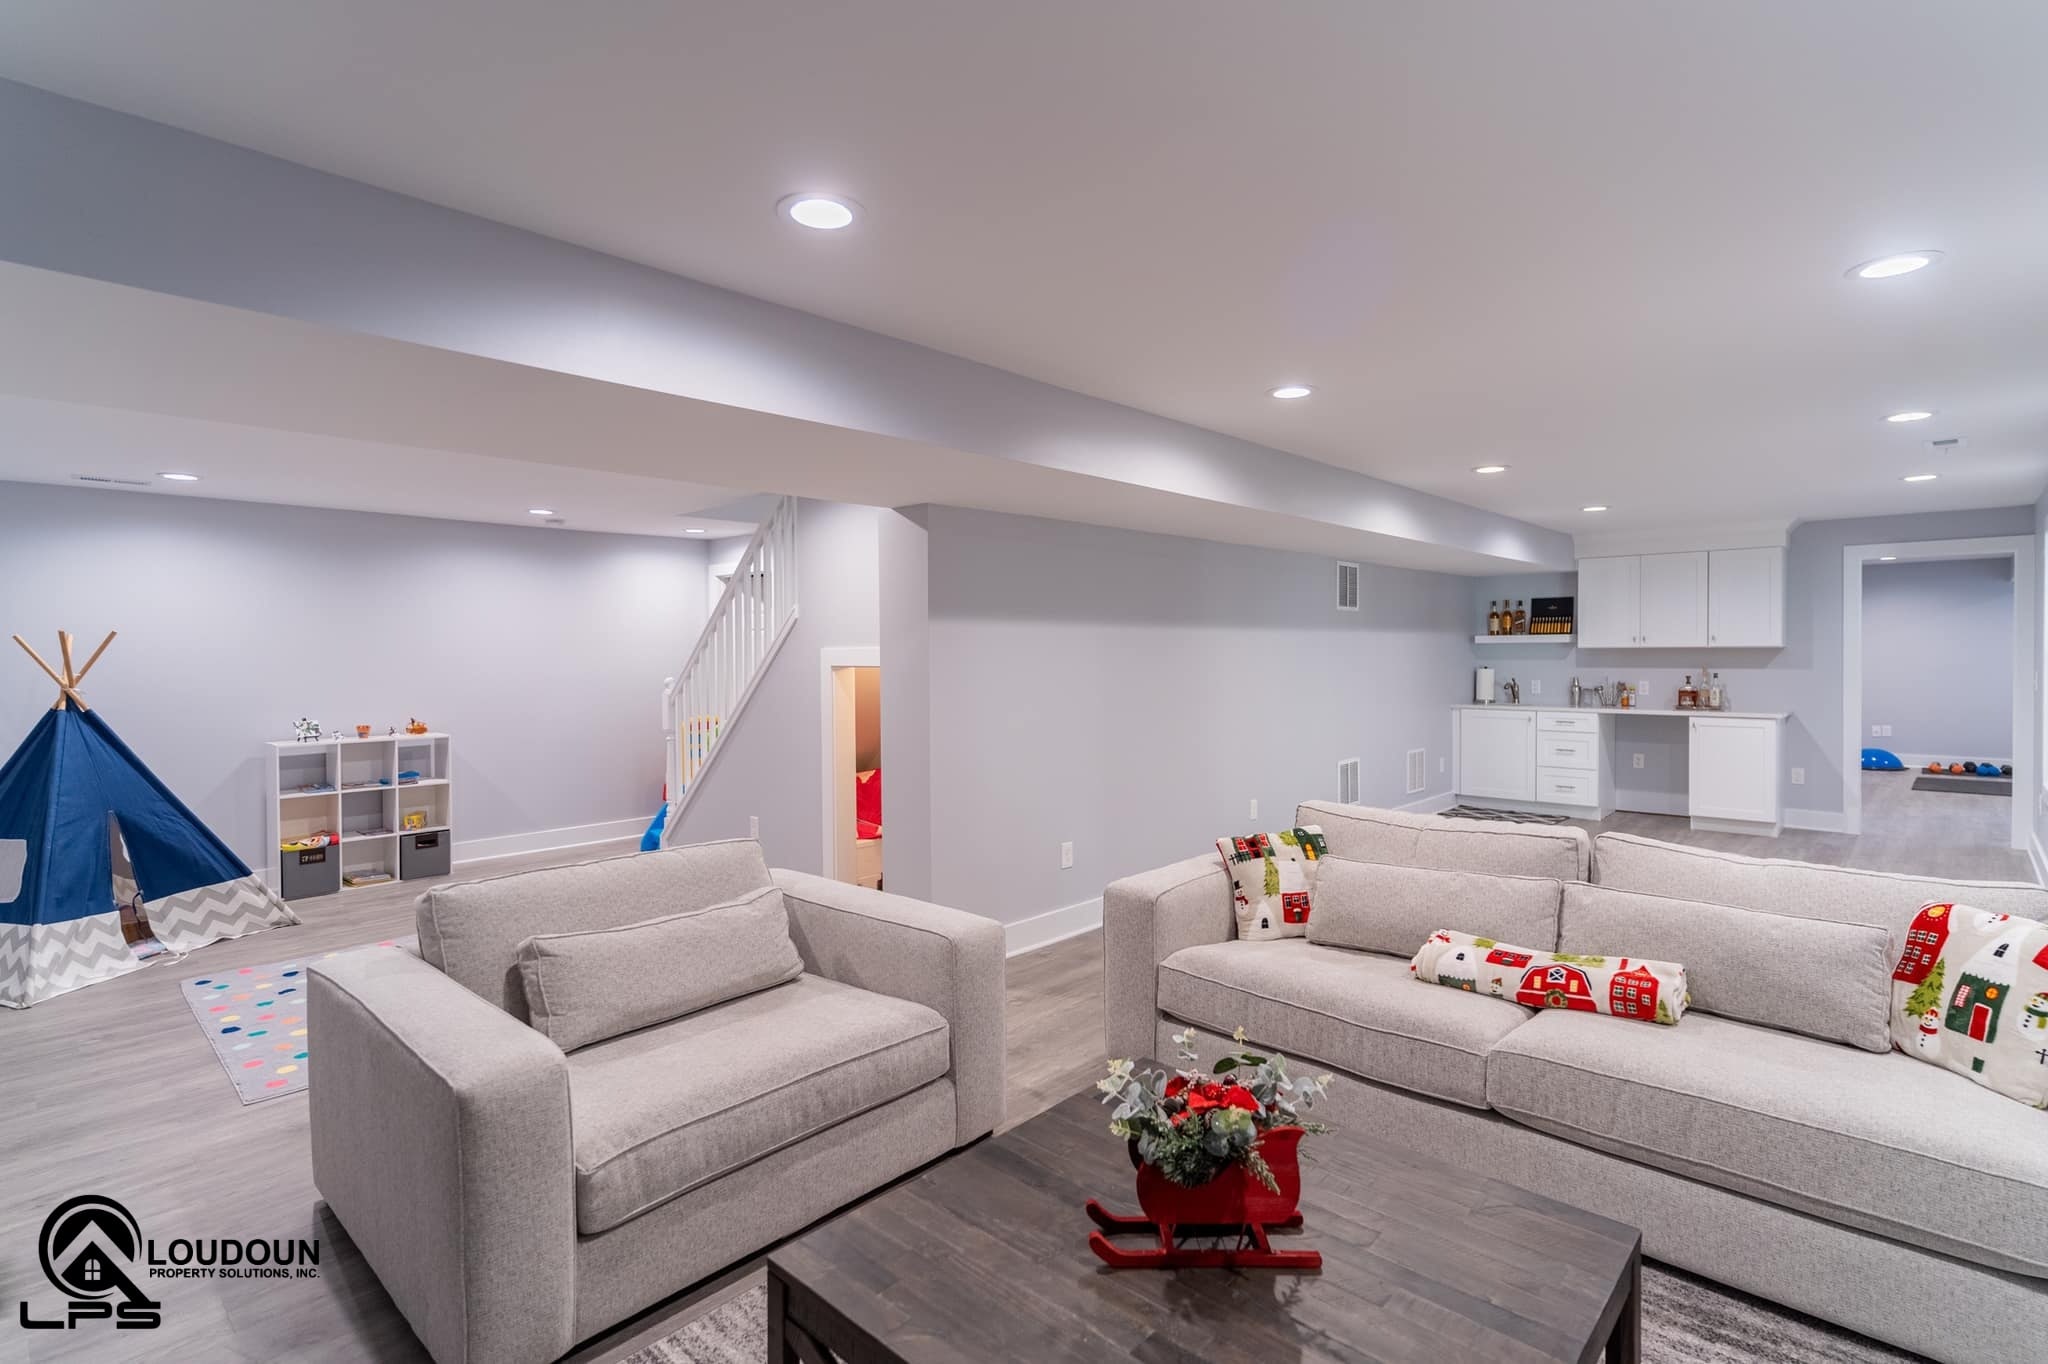 This renovated basement includes a family room, full bathroom, playroom, gym, wet-bar and under-stair storage.